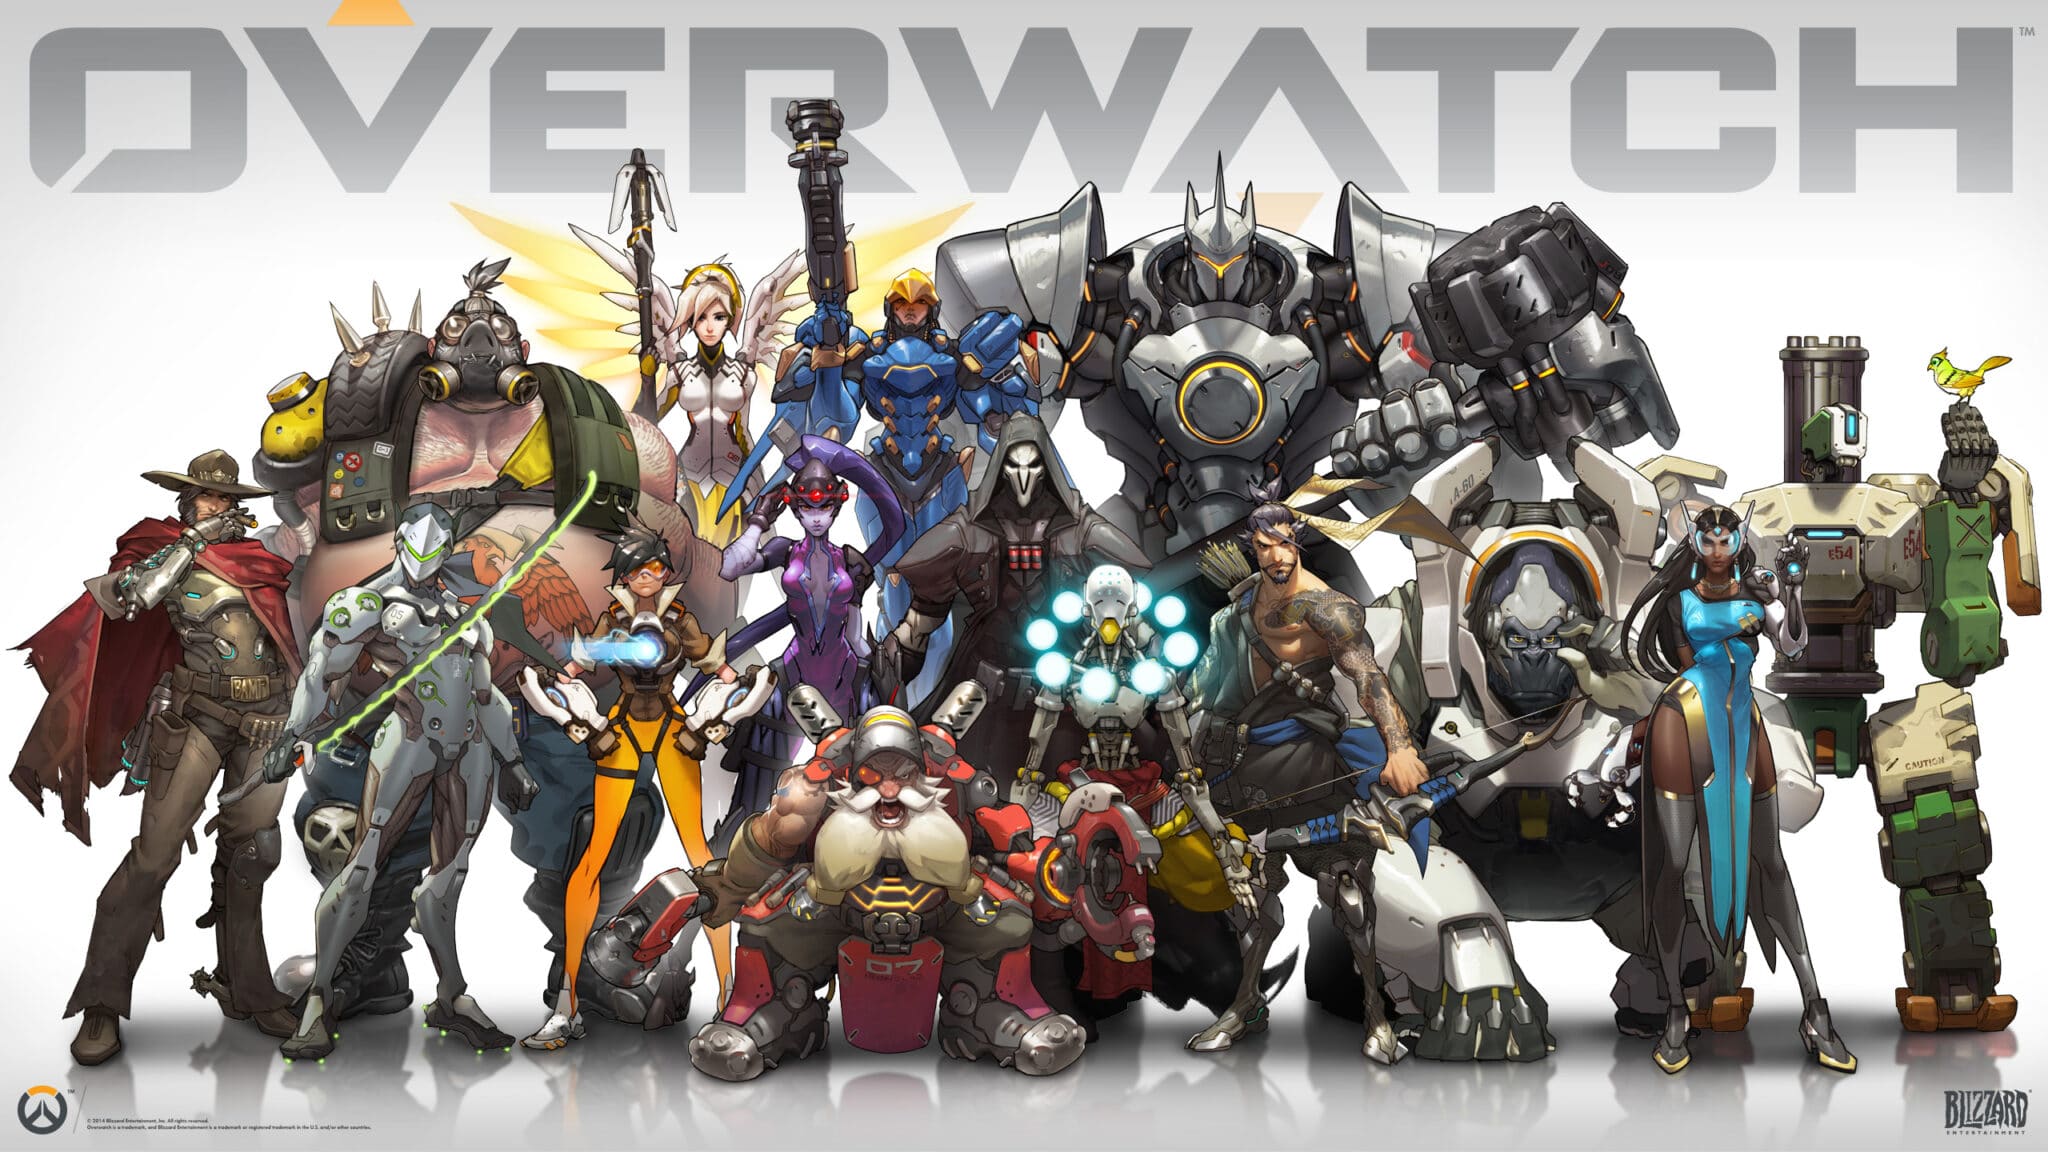 Overwatch is going to be available for free someday soon